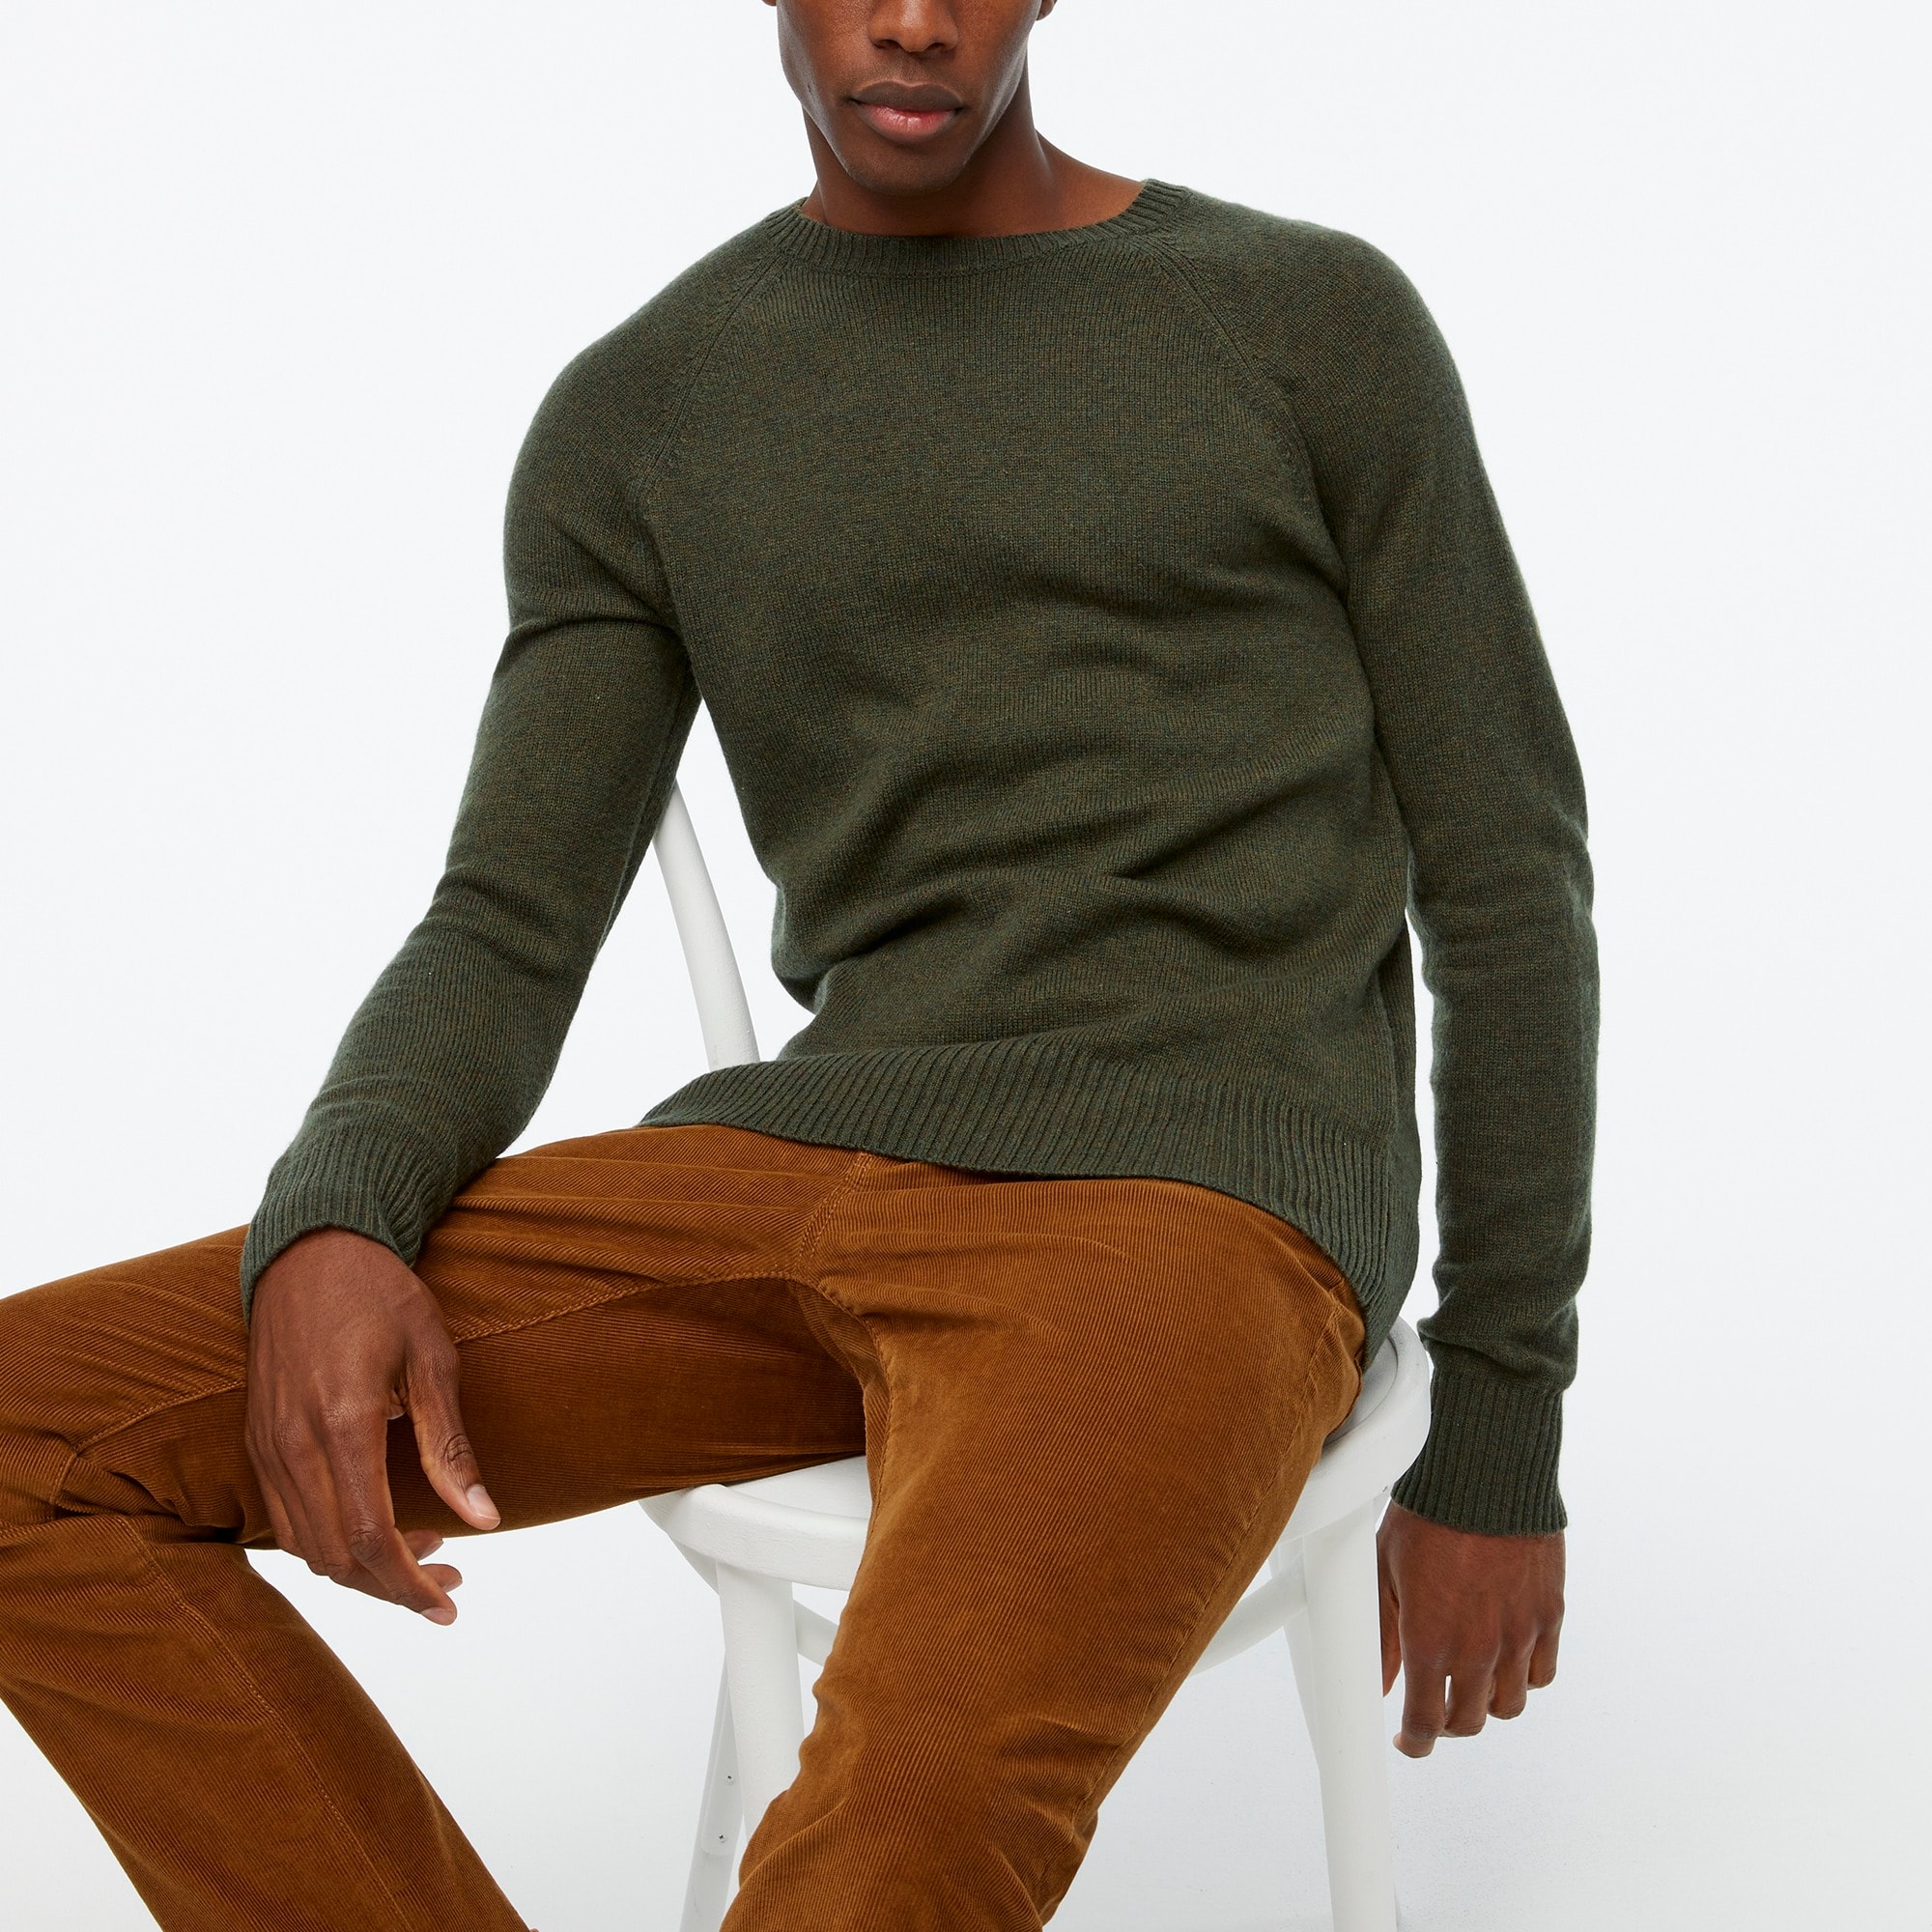 Jcrew Crewneck sweater in supersoft lambswool blend